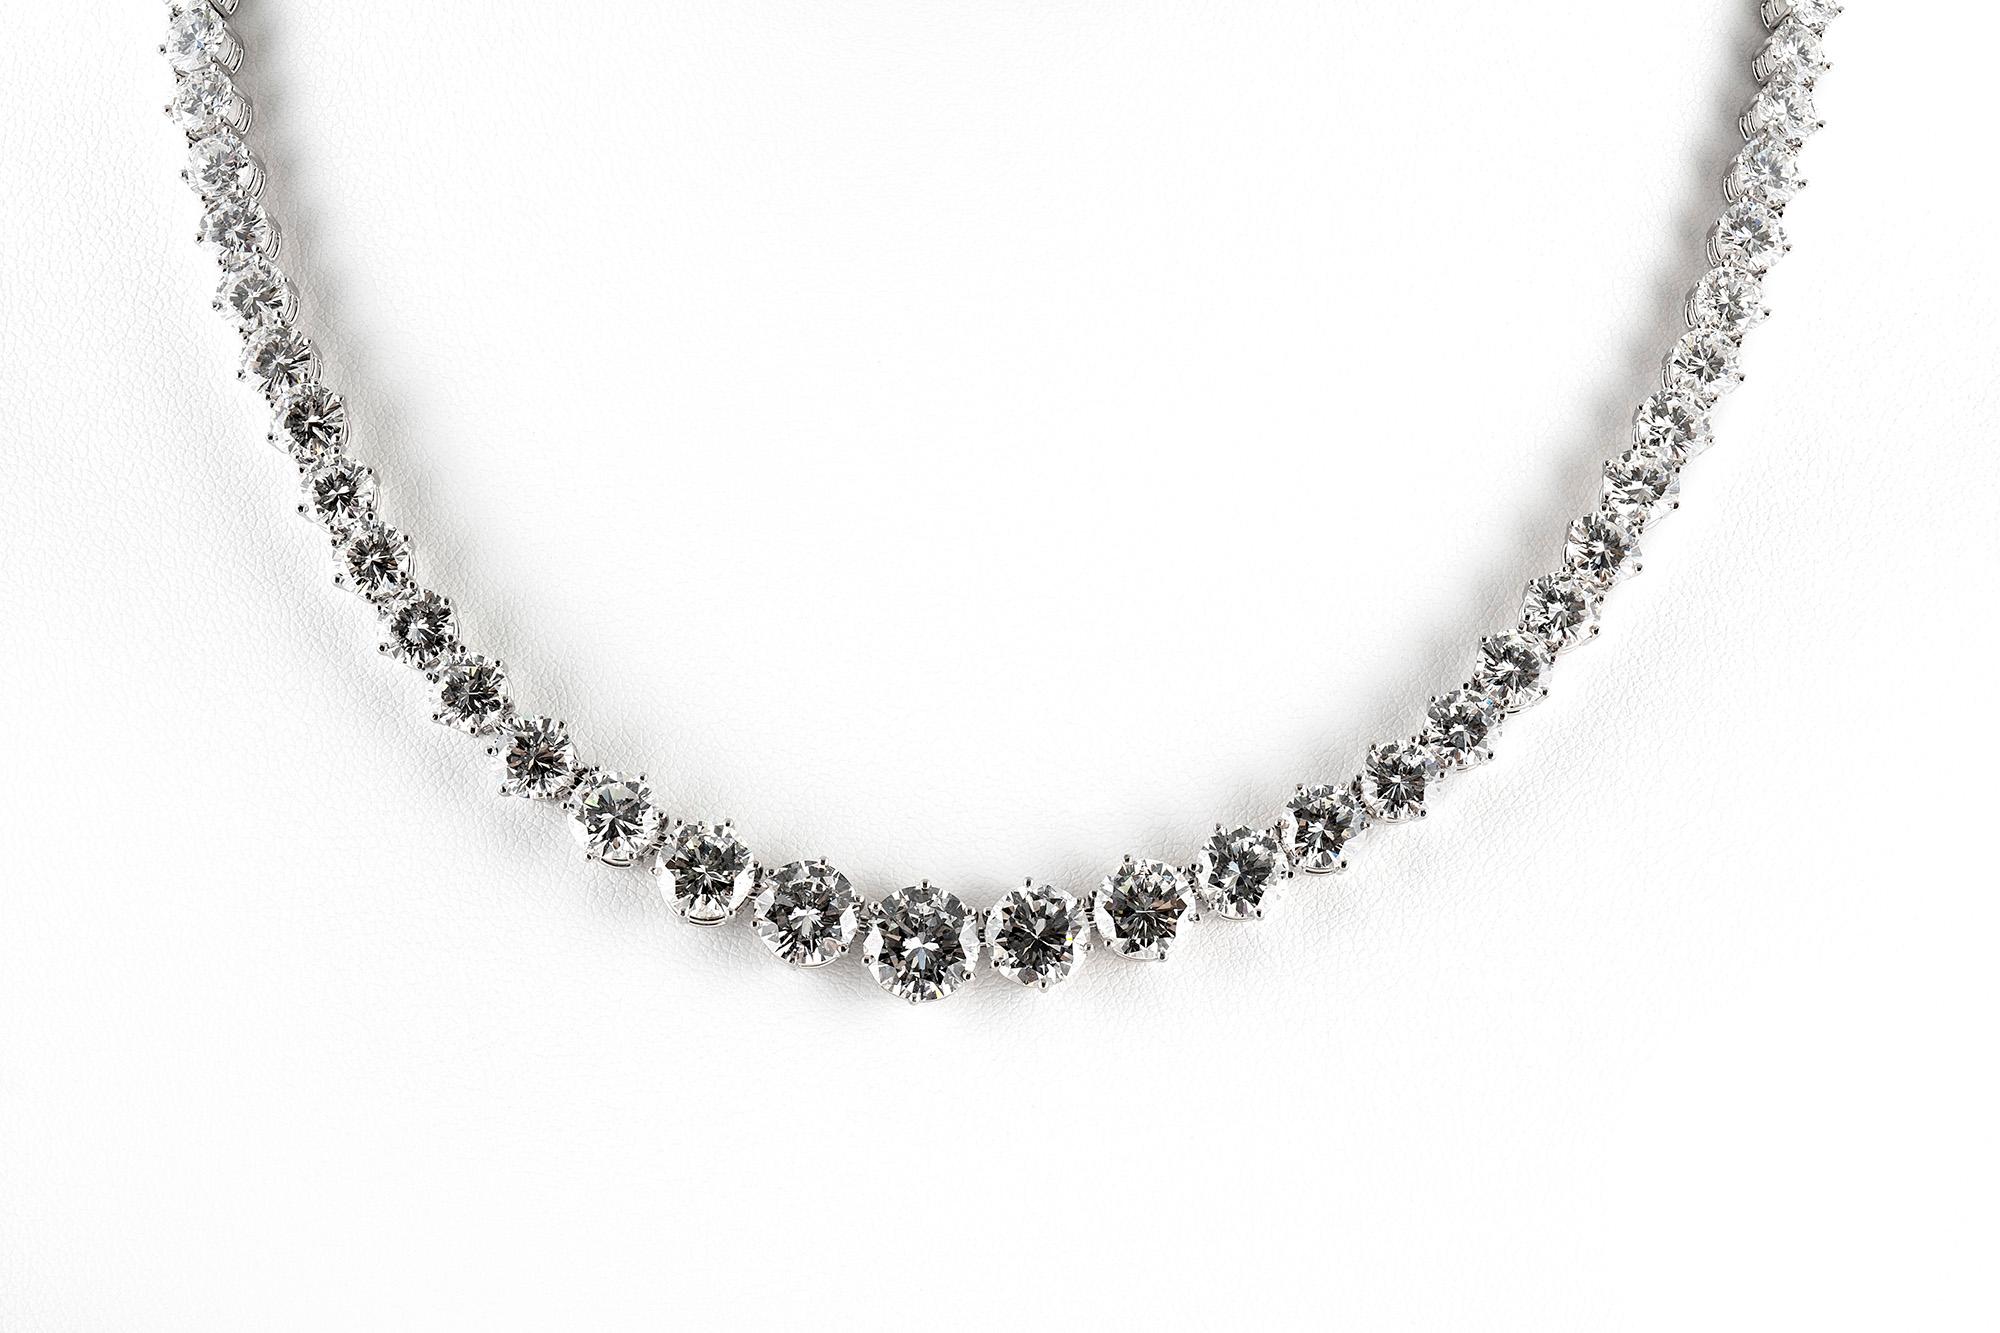 Diamond riviera necklace, finely crafted in platinum, featuring Round Brilliant cut diamonds, weighing a total of approximately 41.00 carat. The 7 front stones are GIA certified; 2.06 carat F color SI1 clarity, 1.57 carat D color VS1 vlarity, 1.50